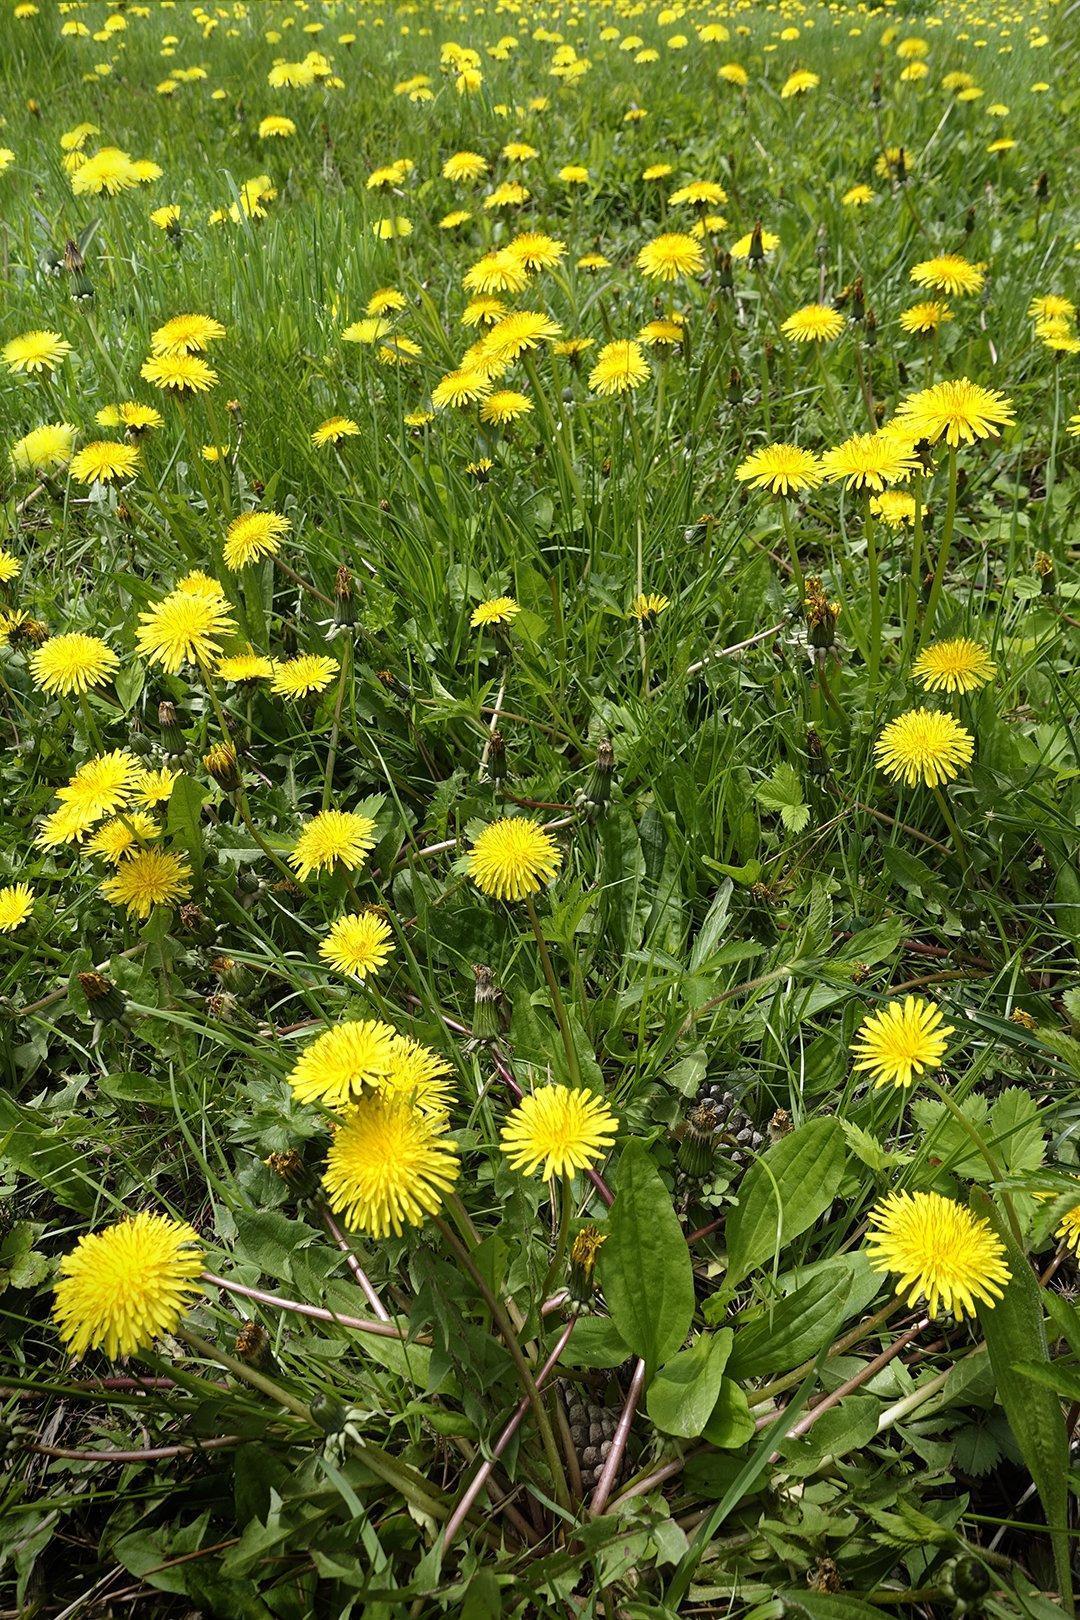 Robin Botie of ithaca, New York photographs her lawn full of dandelions in discovering gratitude in grief.